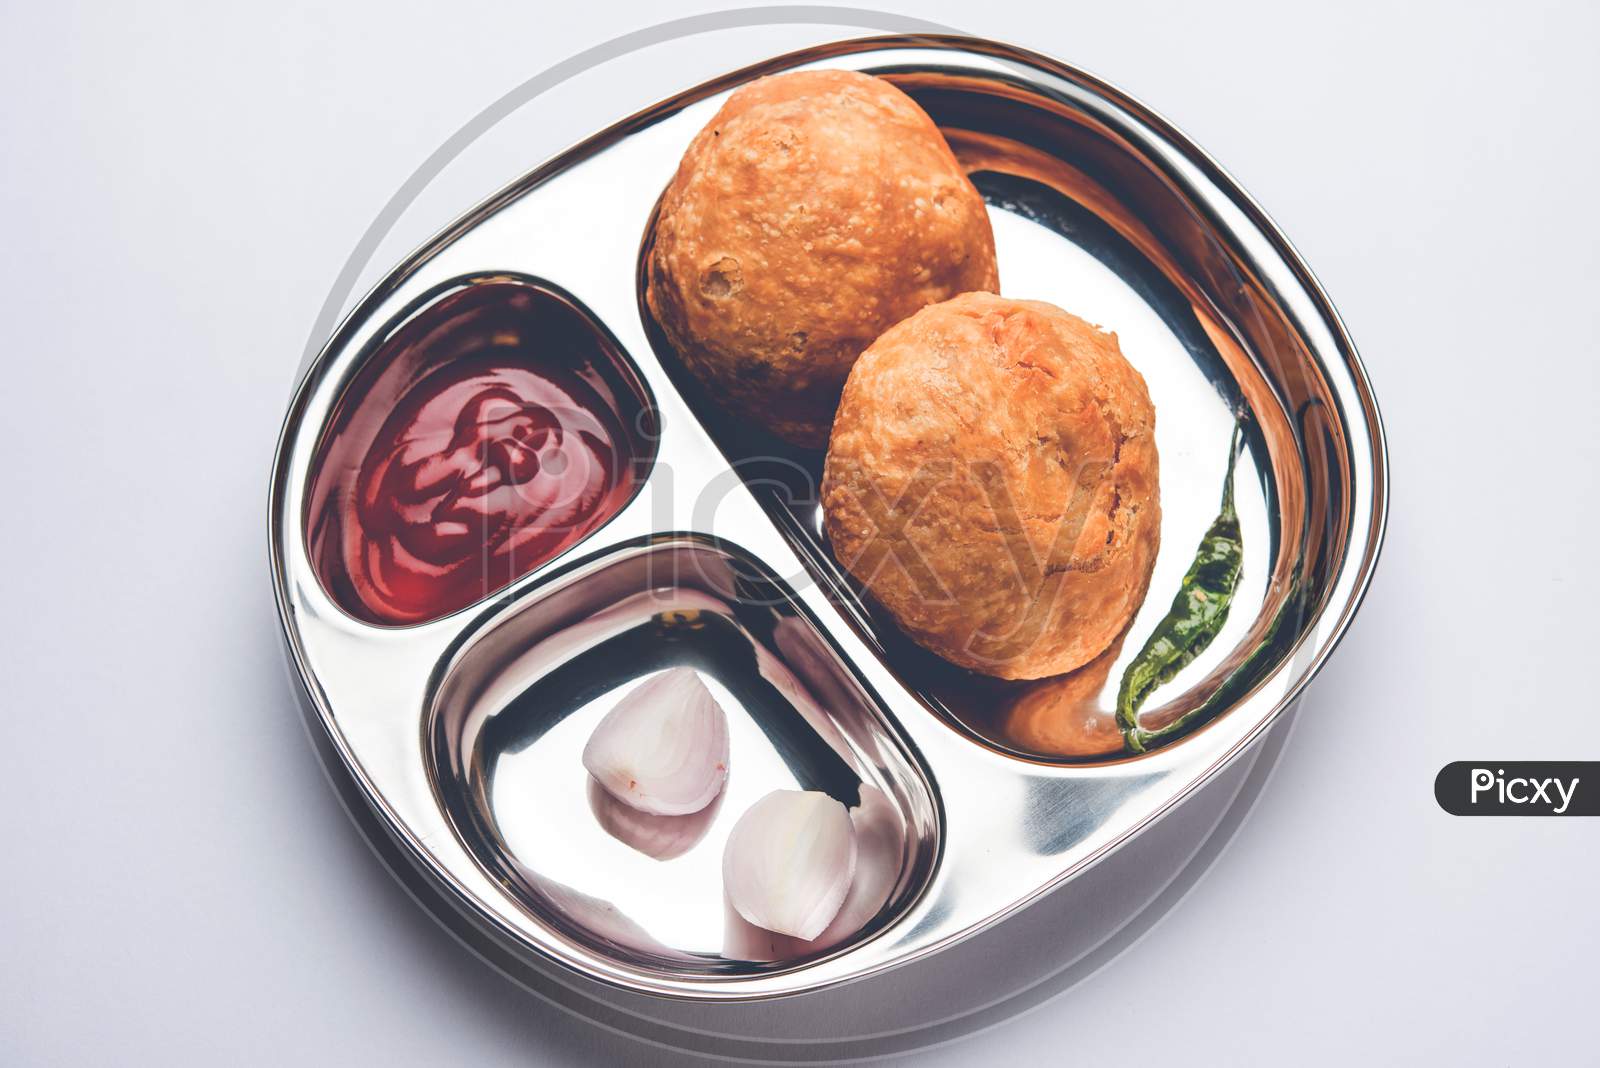 Kachori snack served in steel plate with tomato ketchup and onion